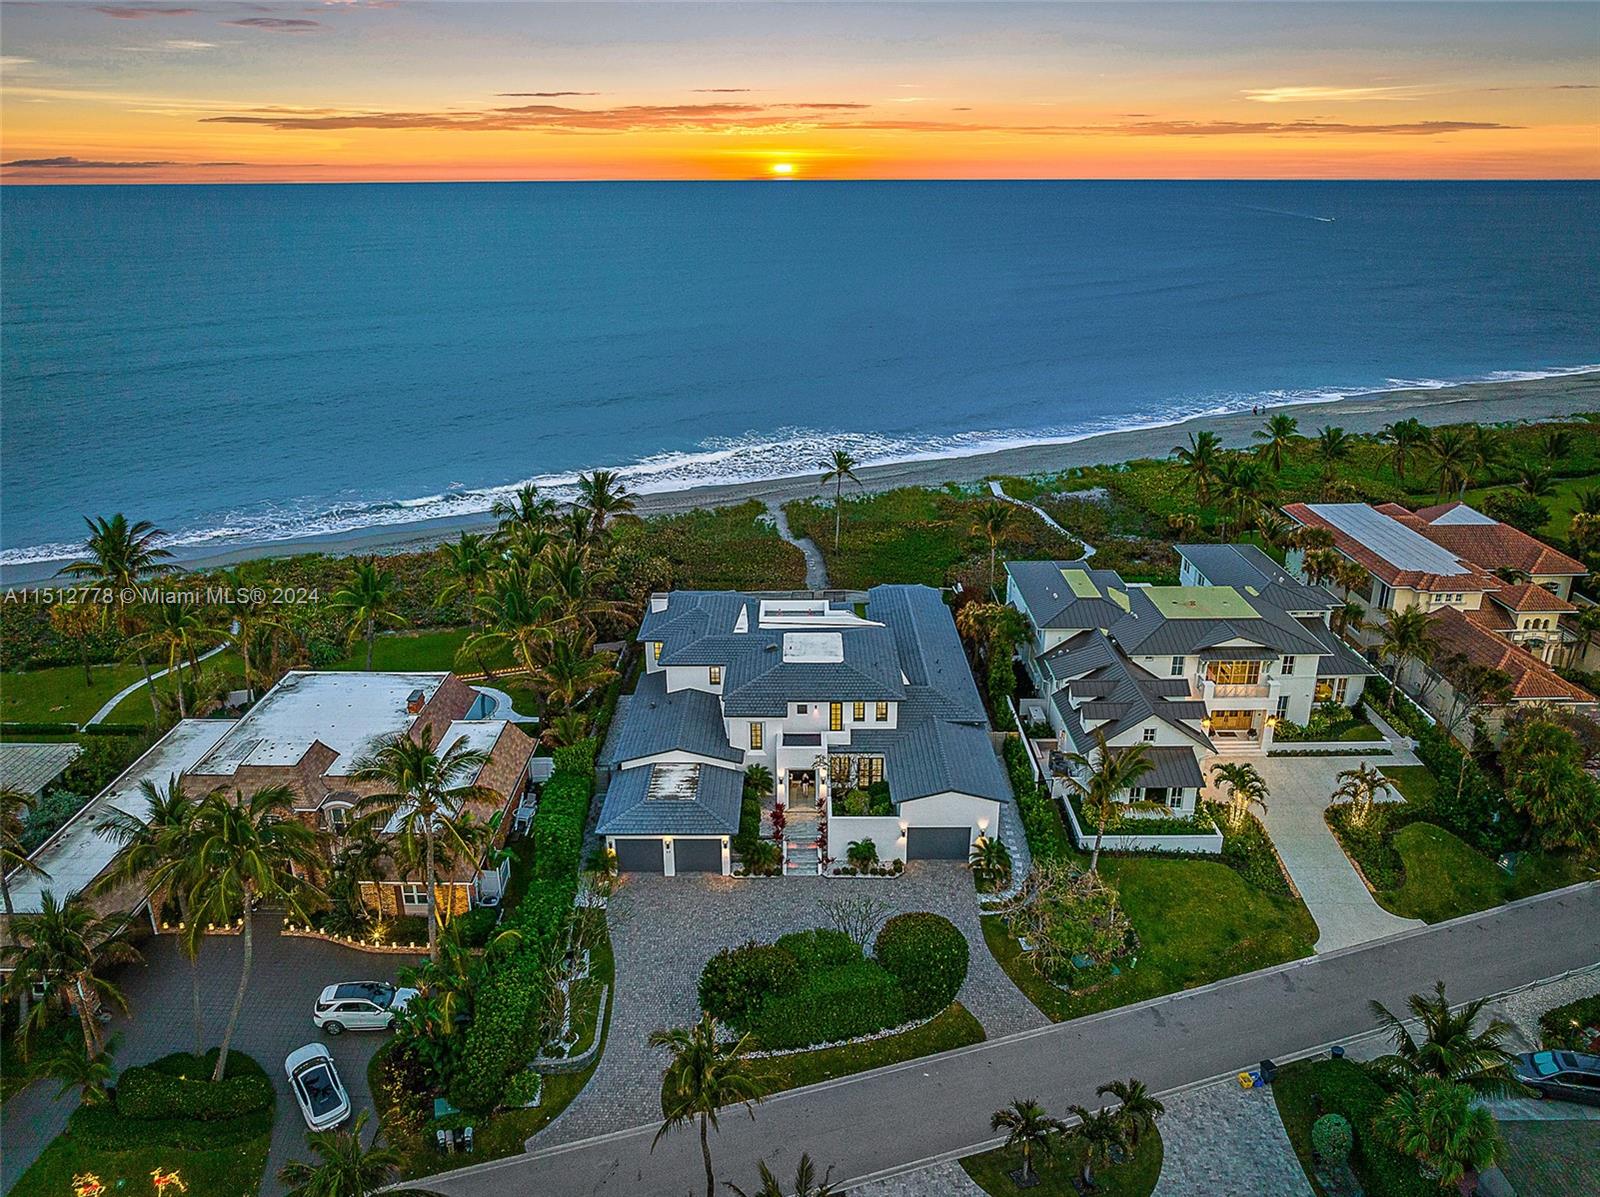 22 Ocean Dr, Jupiter Inlet Colony, Palm Beach County, Florida - 5 Bedrooms  
6 Bathrooms - 